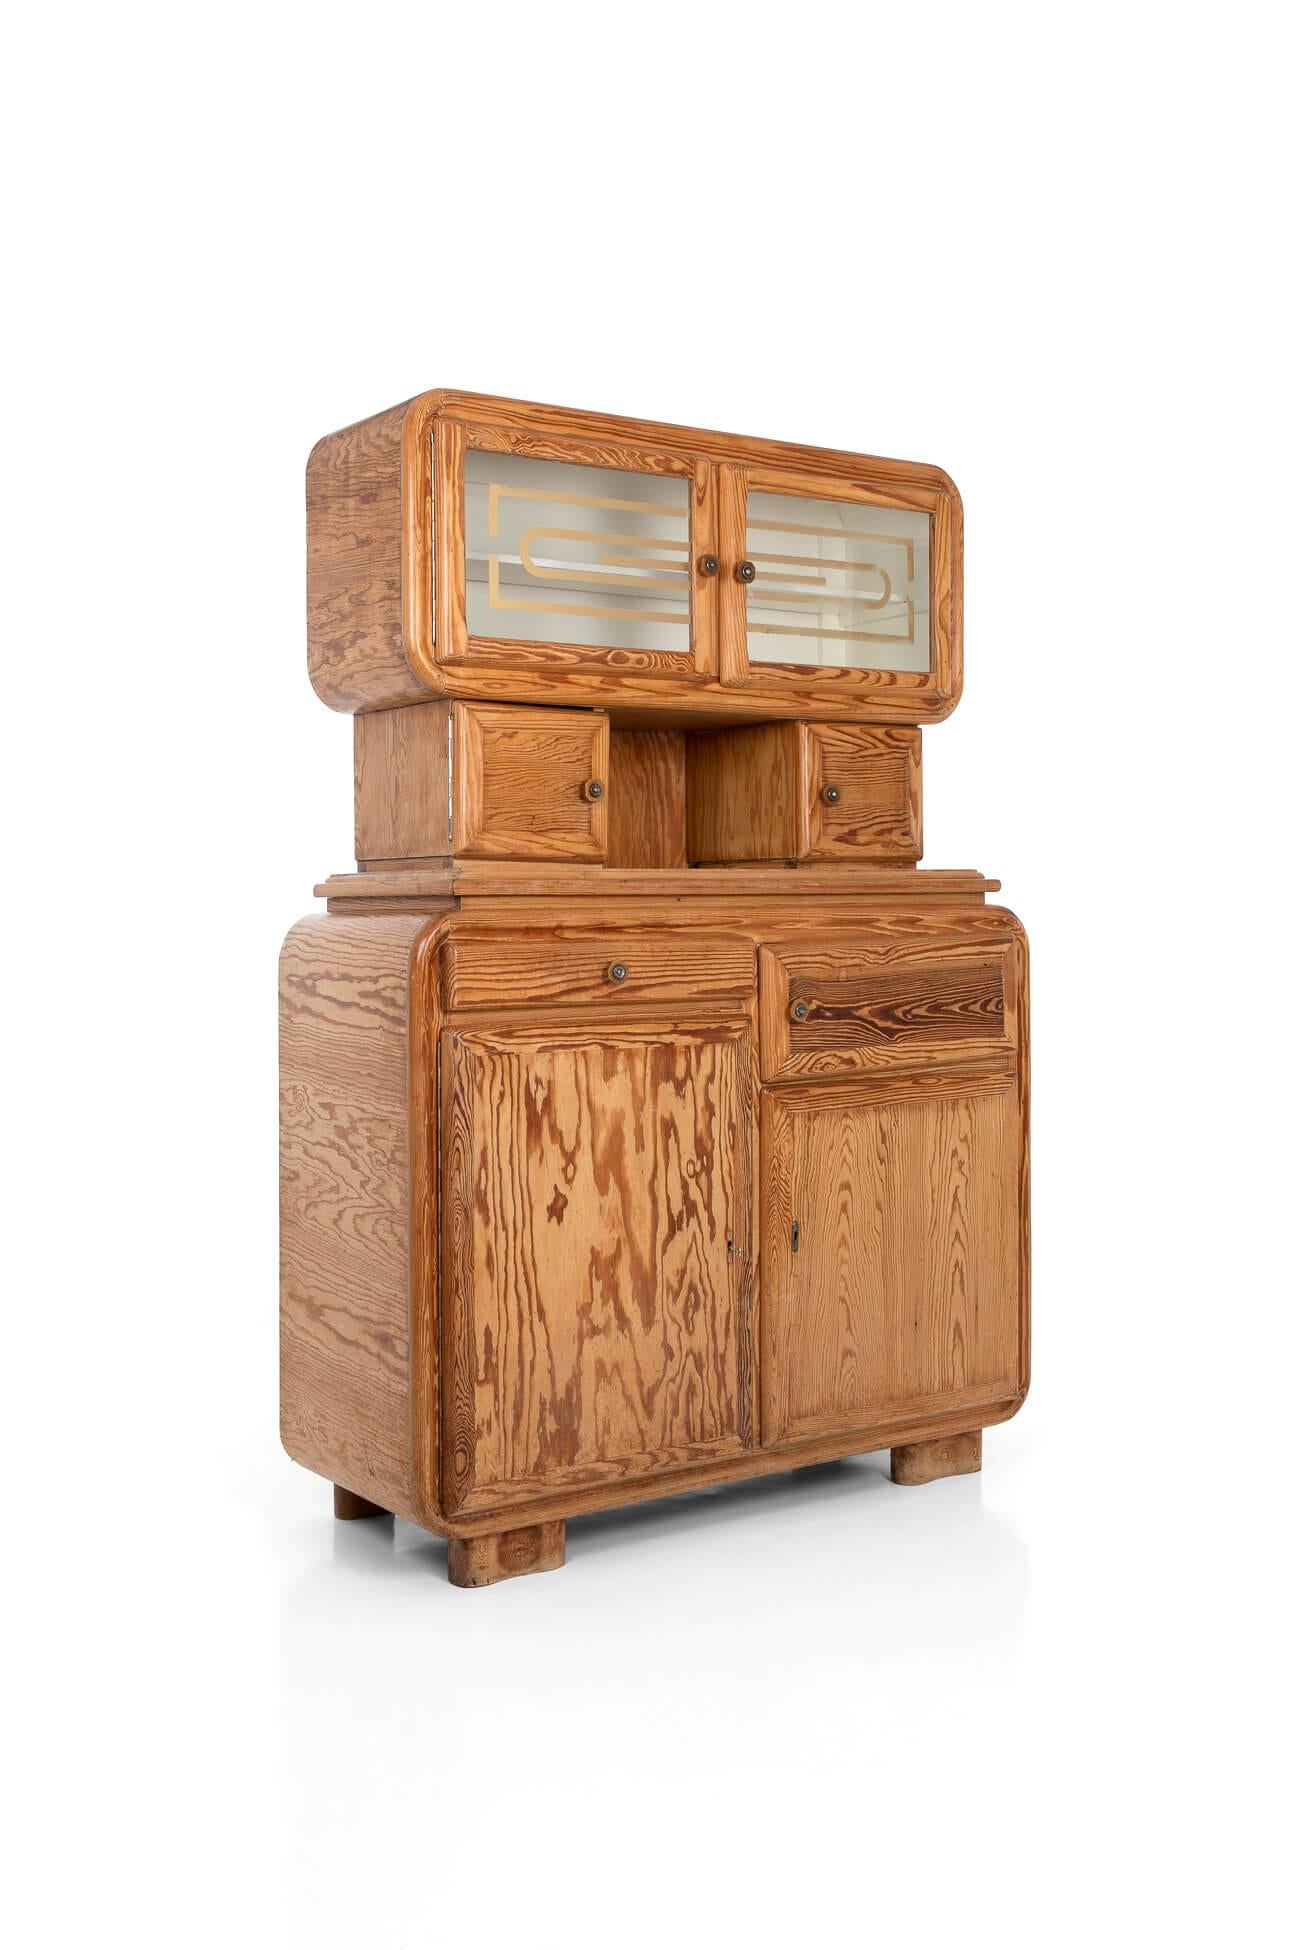 Hoosier’ pine kitchen cabinet with fabulous Art Deco appeal to its rounded corners and edges. Featuring a shallow shelved upper cabinet, a small coffee grinder cupboard and a wonderful set of six ceramic spice drawers. Wooden countertop over a